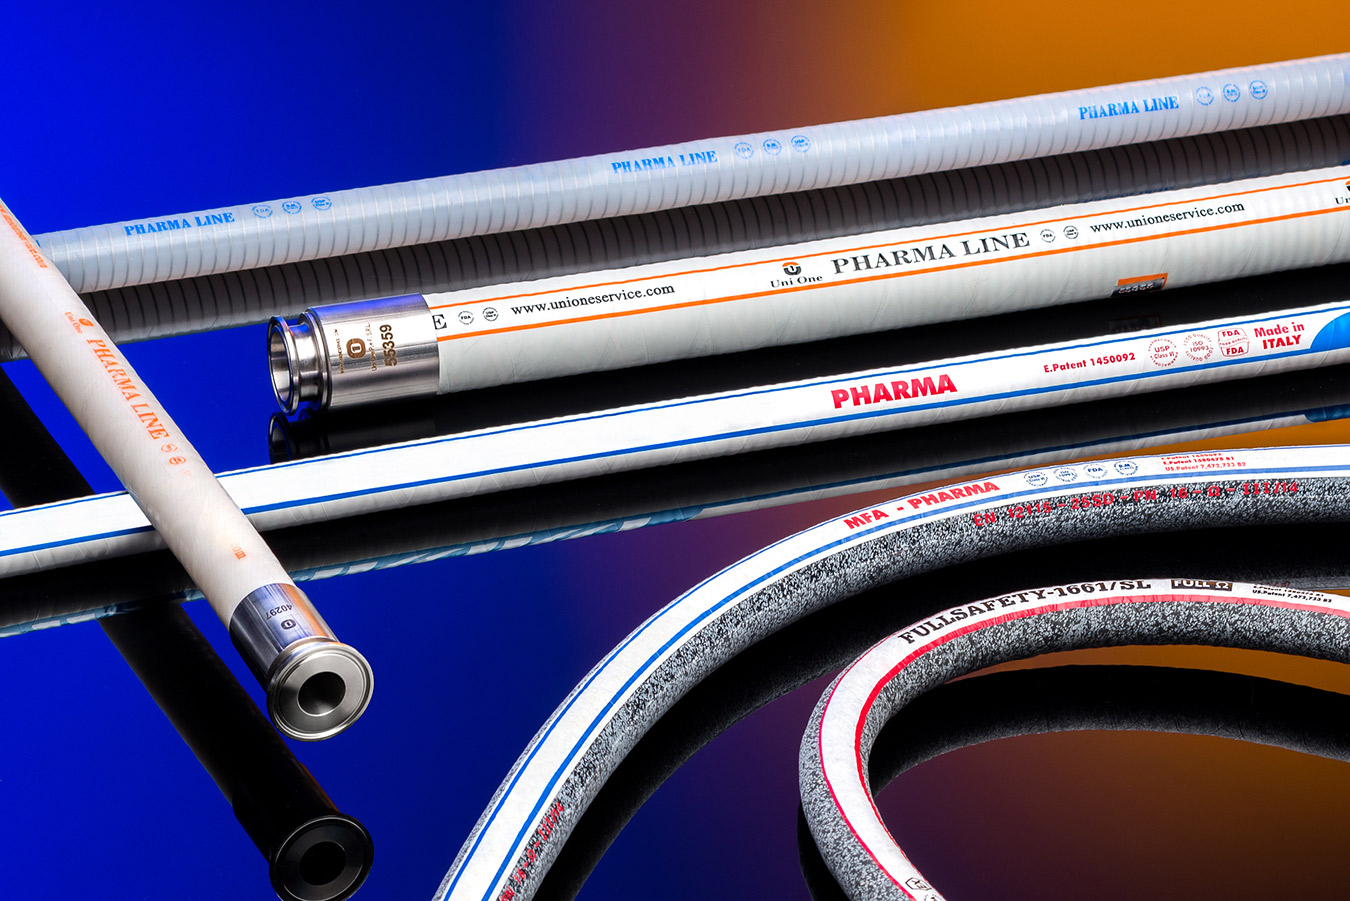 Specific hoses for conveying high purity products intended for human contact for applications in aseptic environments, also ATEX classified